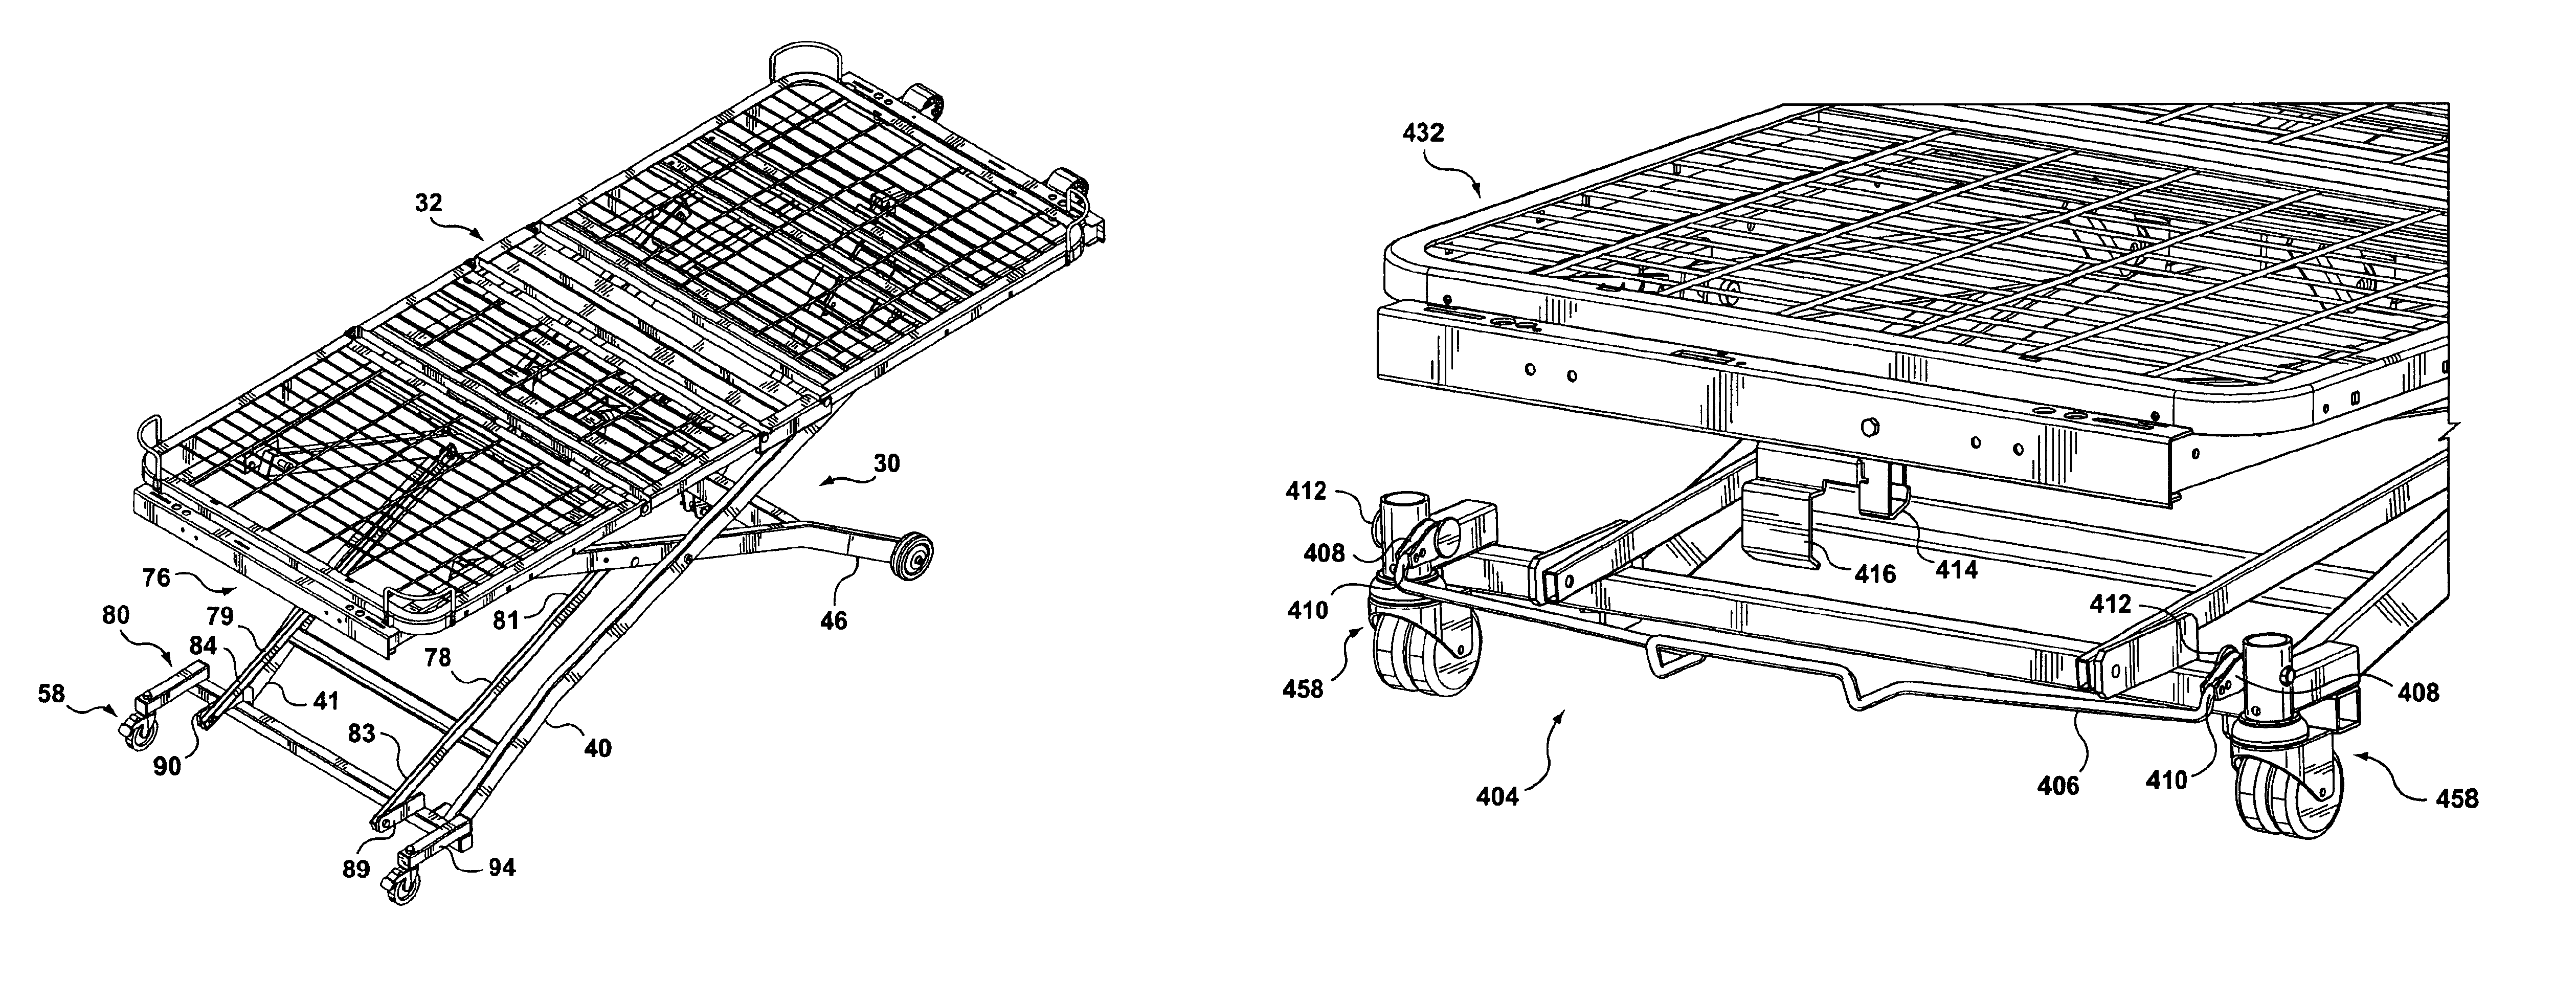 Adjustable bed carriage